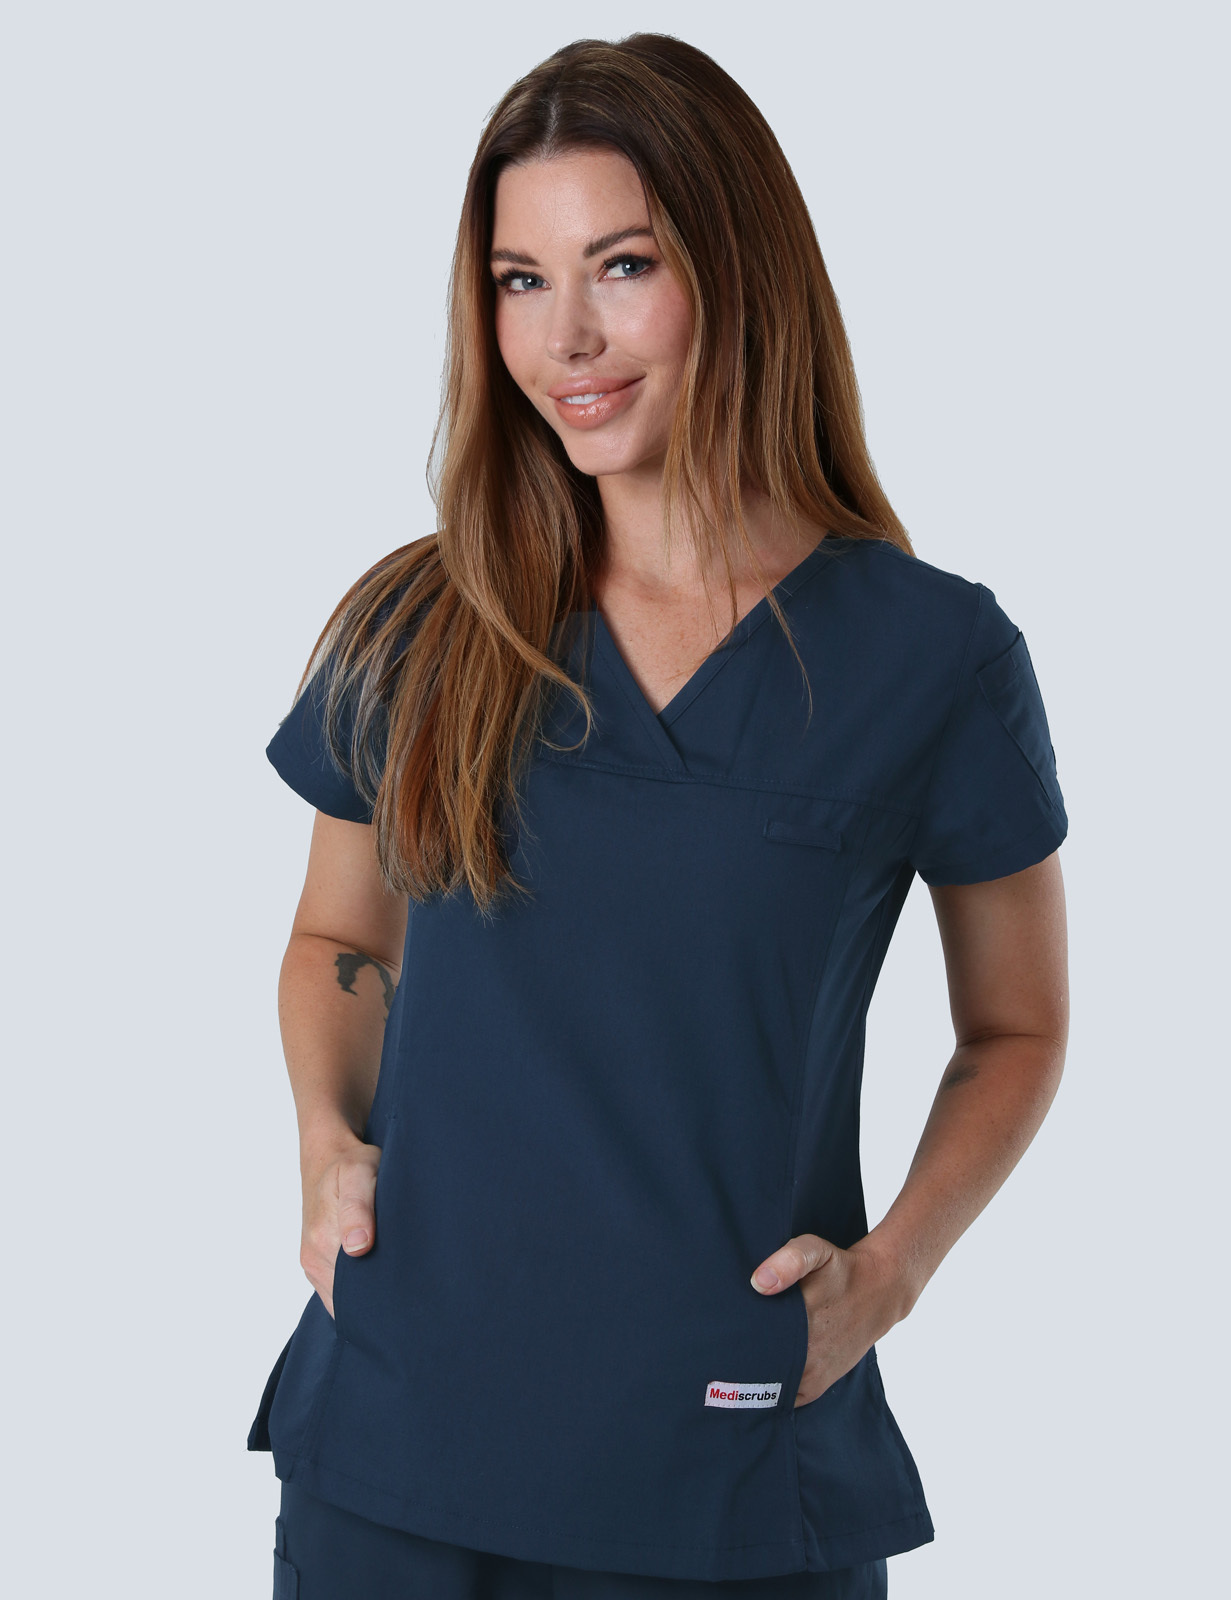 Hopevale Primary Health - CN (Women's Fit Solid Scrub Top and Cargo Pants in Navy incl Logos)